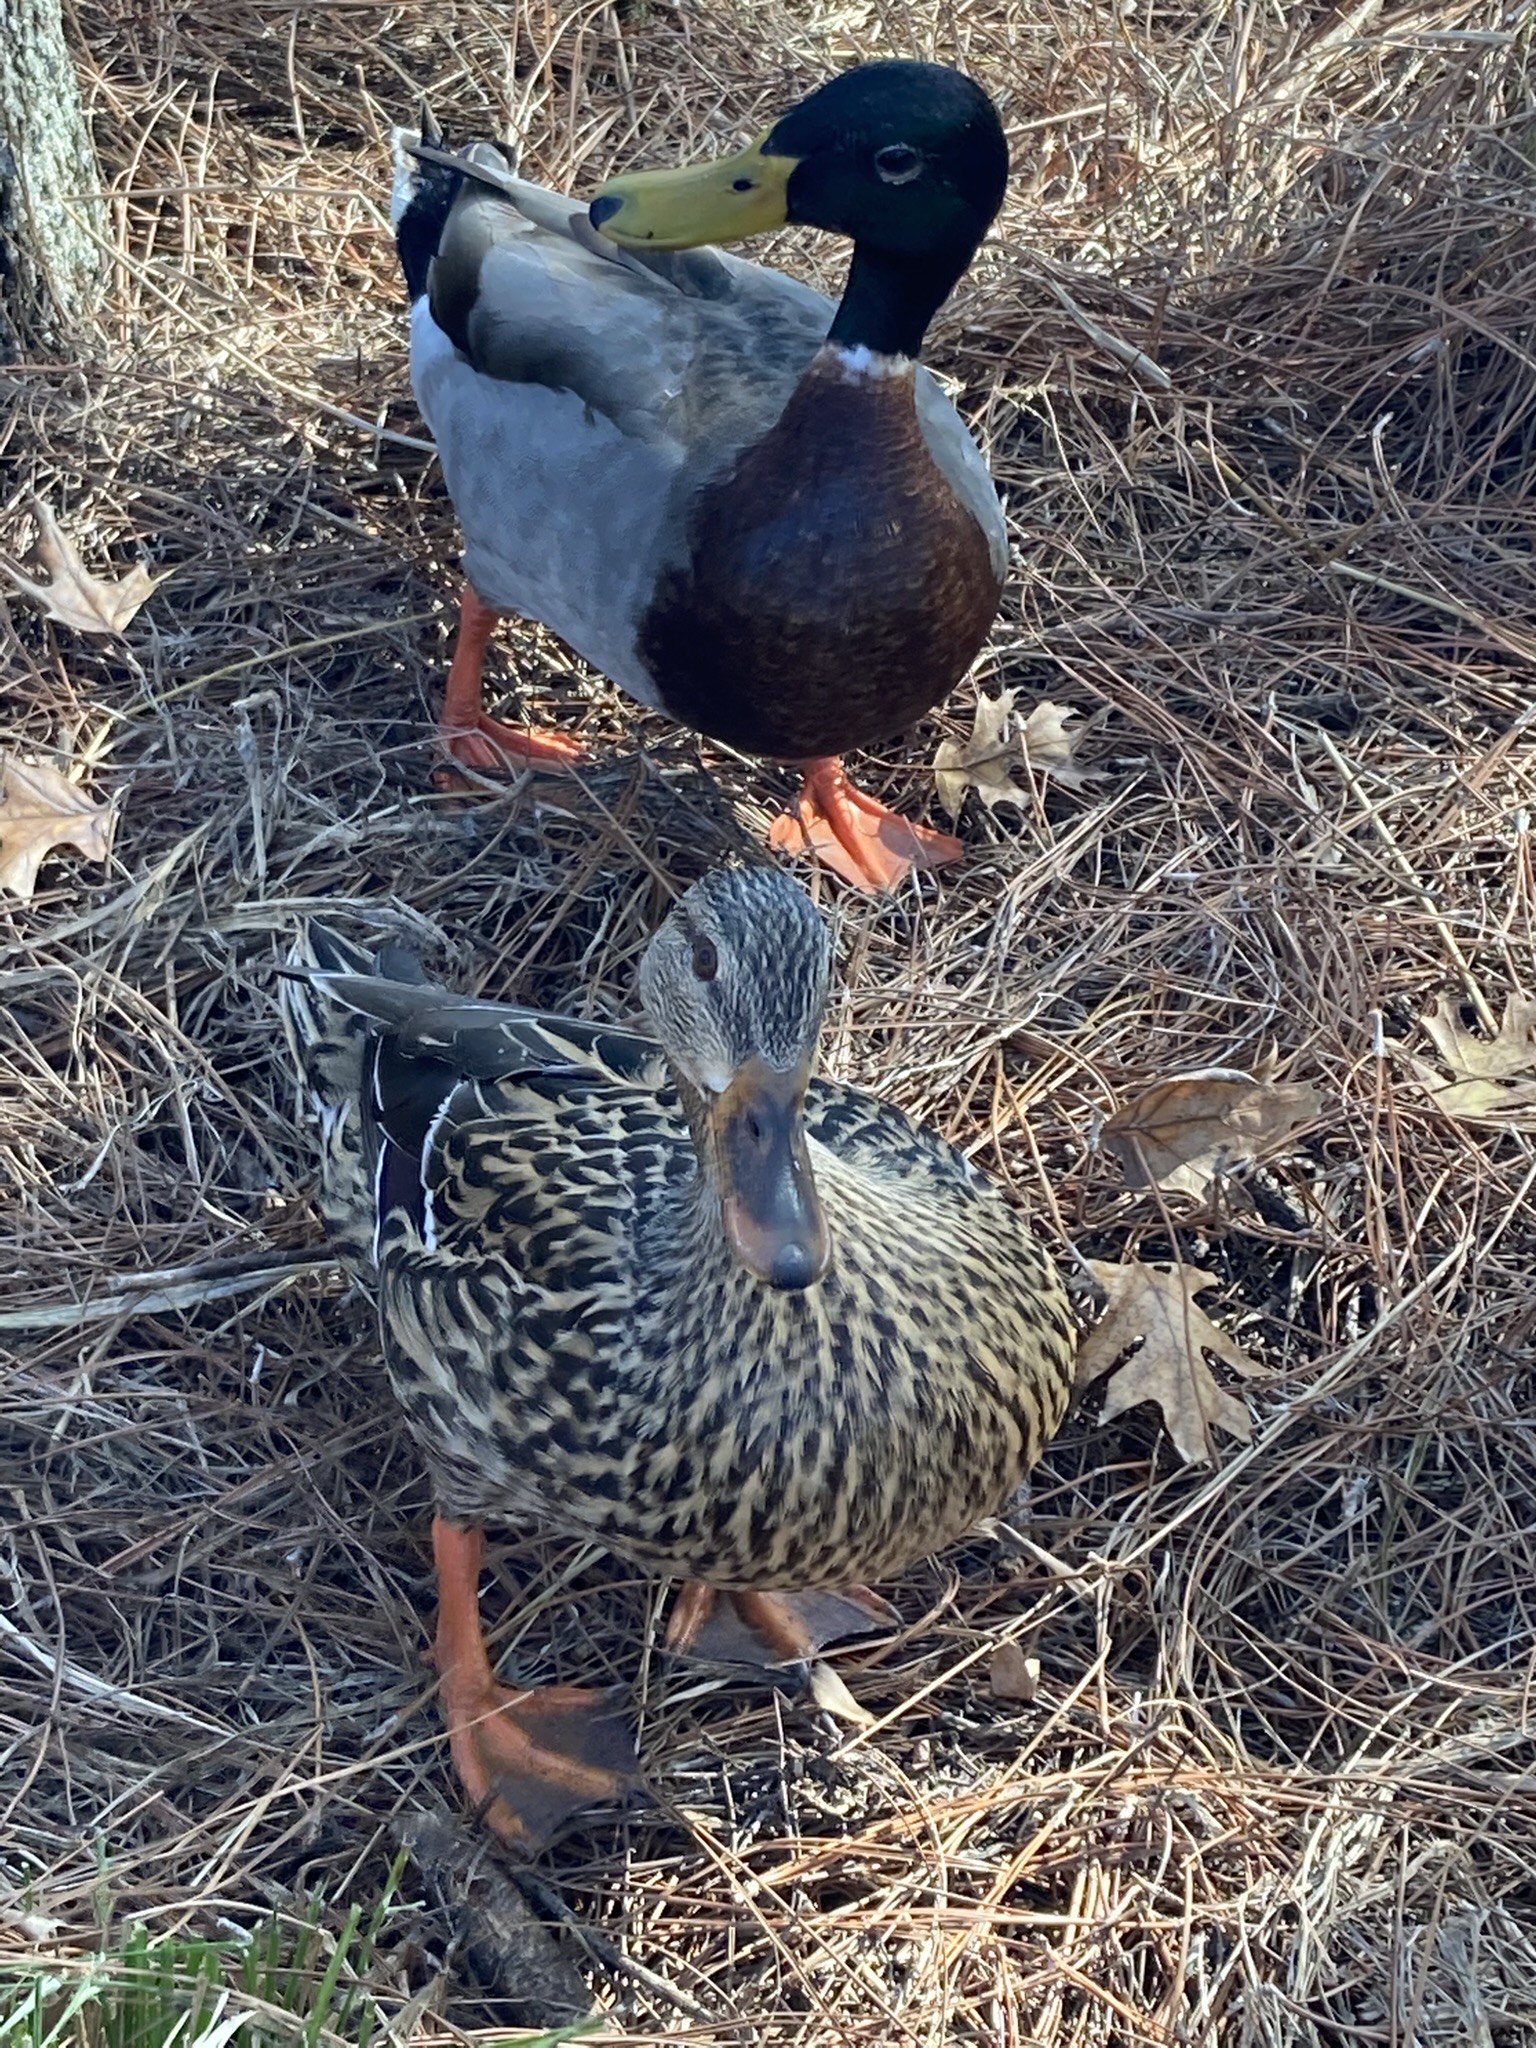 a pair of mallard ducks, one male and one female, standing on some fallen pine needles. the male is higher in the frame and has his head turned to the side, while the female is lower and is looking more straight-on